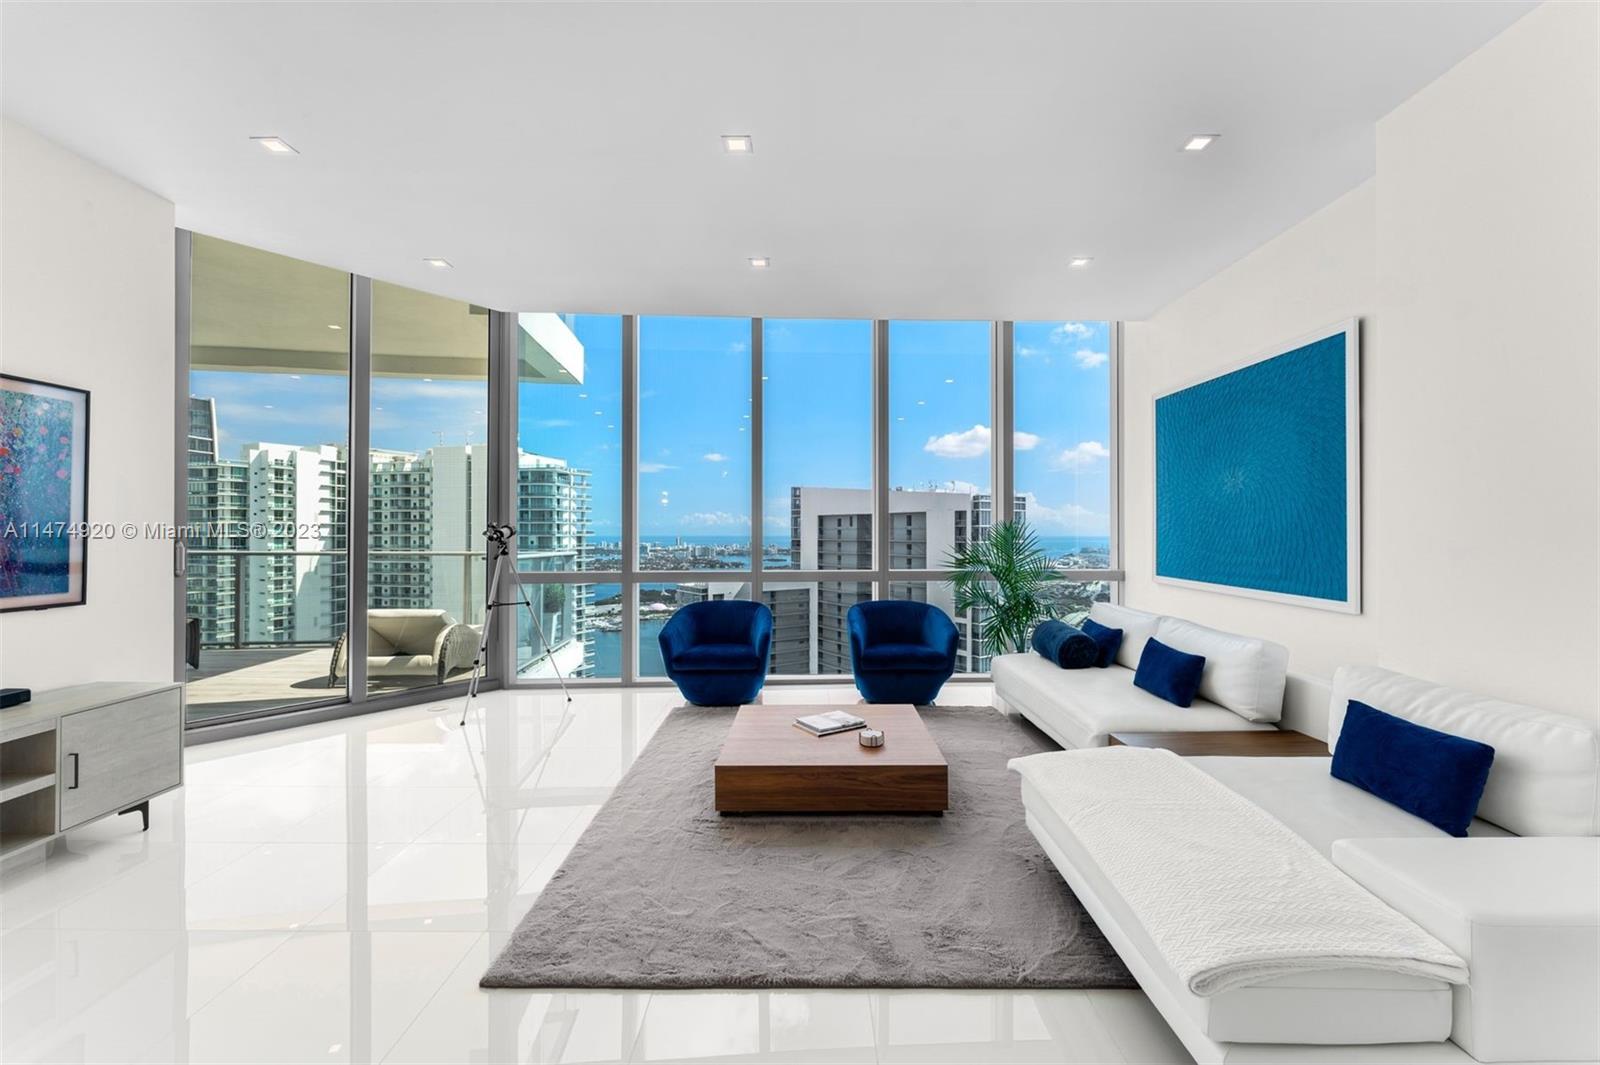 Penthouse 5105 at Paramount Miami Worldcenter is an oversized 1 Bed + Den, 2 Bath condo w/ 1,422 interior sq ft, 11-foot-high ceilings w/ floor-to-ceiling glass windows, white porcelain tiled flooring throughout, motorized shades, dropped ceiling w/ recessed lighting, and spacious terrace w/ views of Biscayne Bay & the Atlantic Ocean from the 51st floor. The den is fully enclosed w/ a closet + plenty of room to accommodate a queen-sized bed. Includes 1 assigned parking space + 1 valet-only space. Building amenities include 5 pools, 2 hot tubs, fitness center, 2 lighted tennis courts, boxing ring, basketball half-court, racquetball court, children's playroom, business center, yoga studios, soccer field, and much more. Over 300,000 sq ft of shops and restaurants at your doorstep.